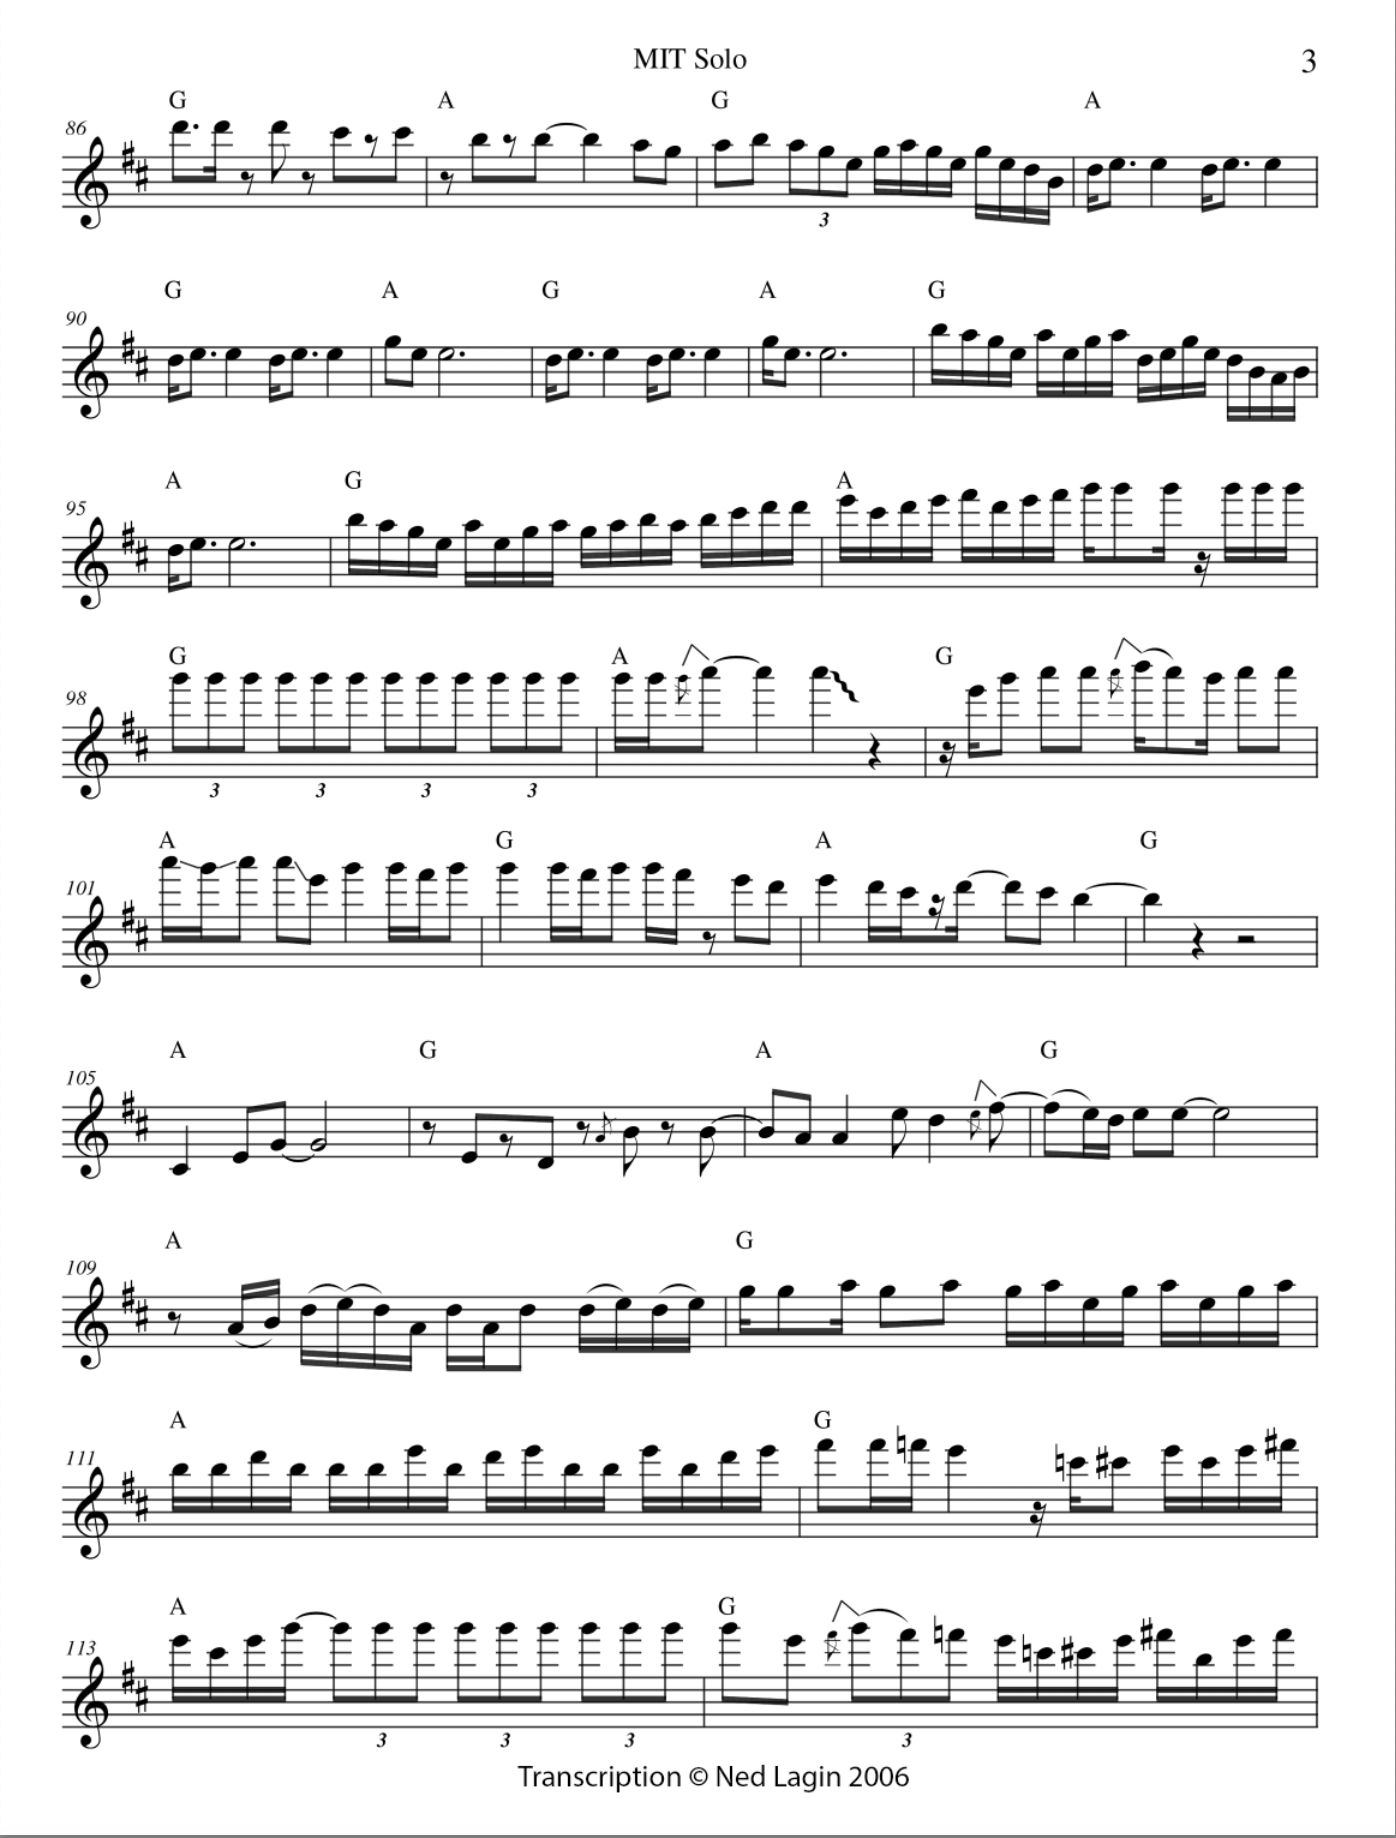 Jerry Garcia guitar solo transcription Page 3 - Photo © Ned Lagin